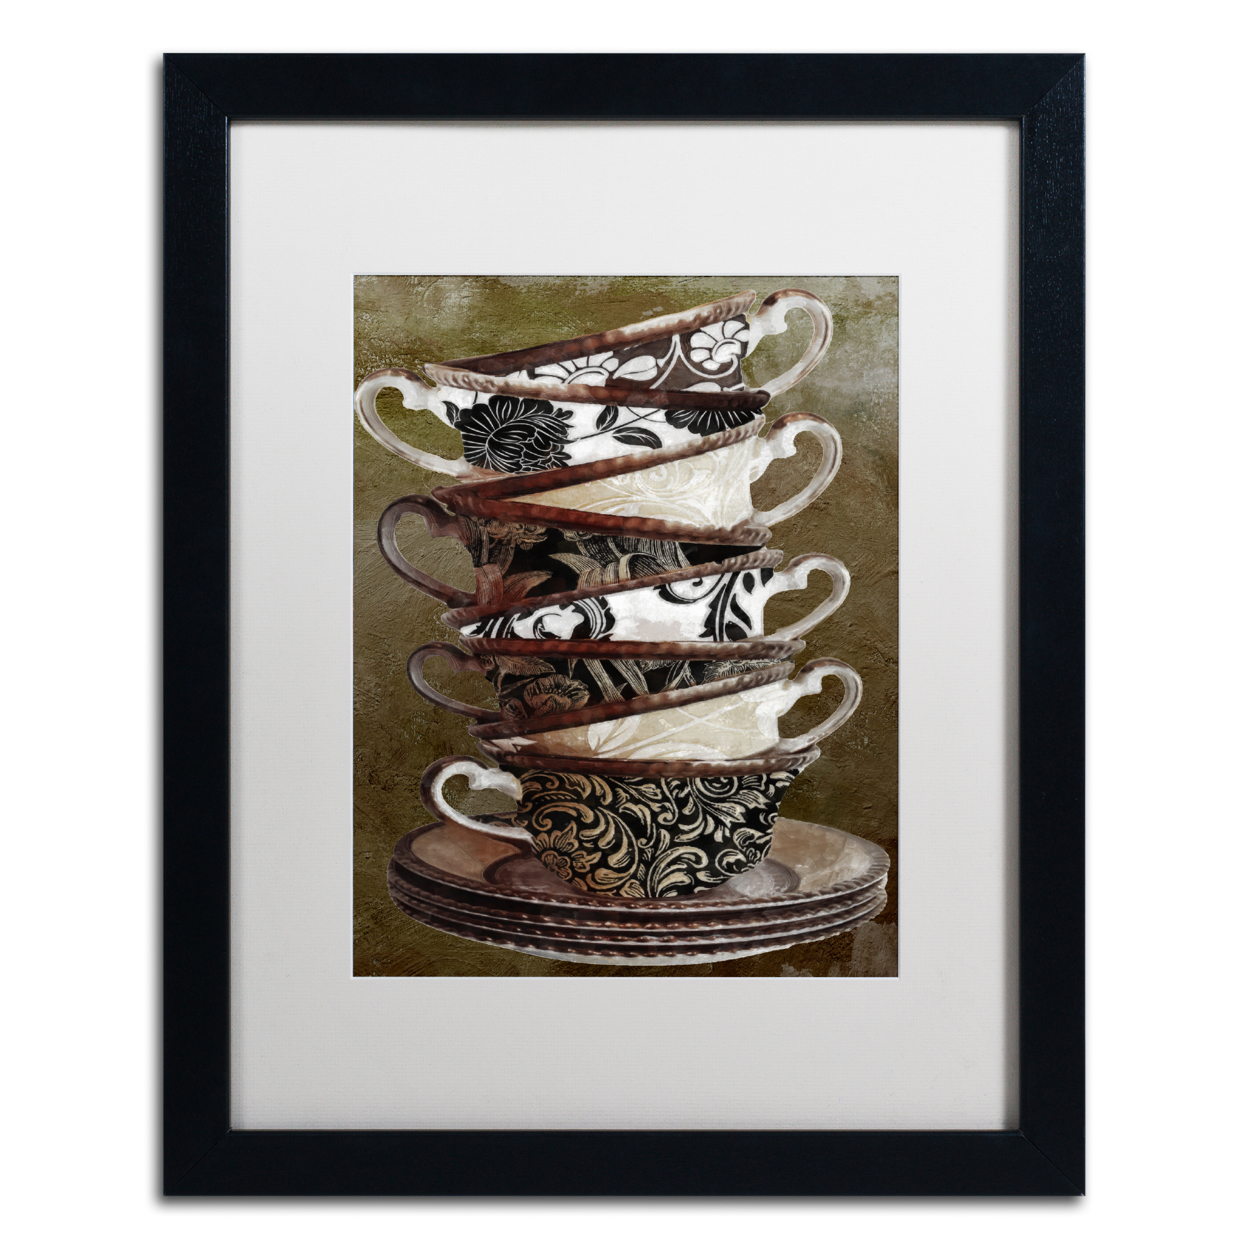 Color Bakery 'Afternoon Tea II' Black Wooden Framed Art 18 X 22 Inches